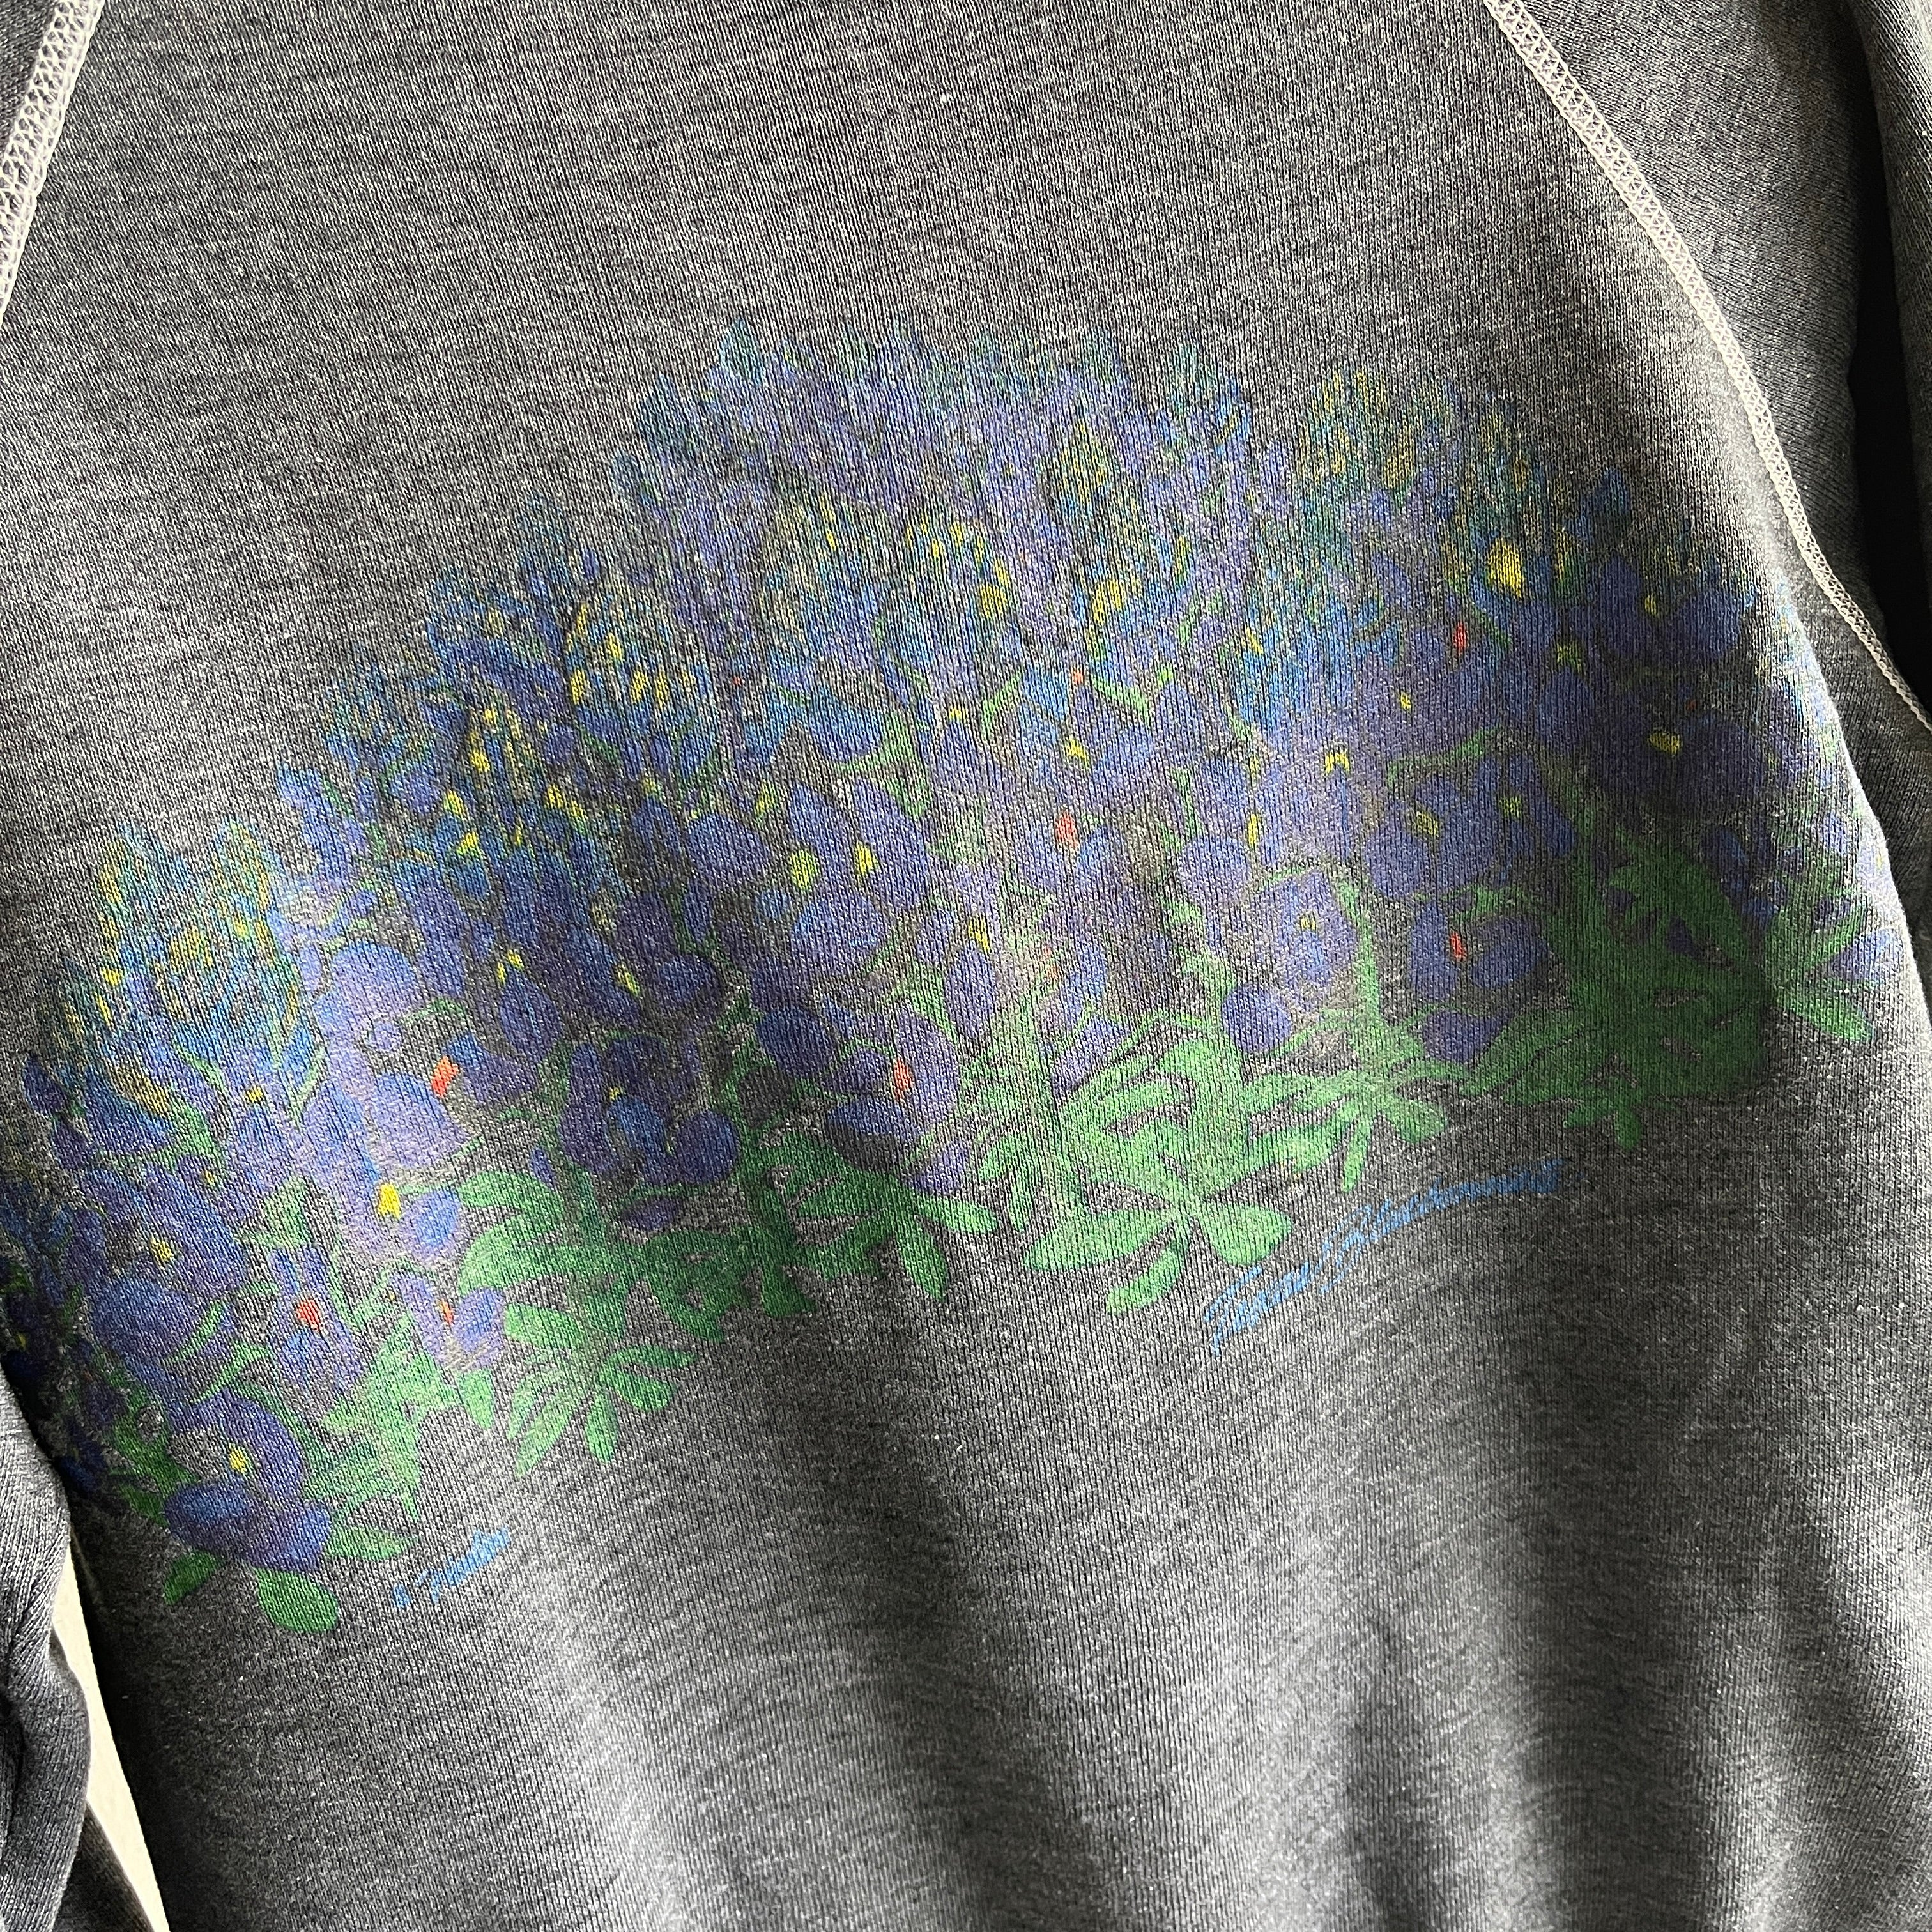 1980s Re Dyed Iris Front and Back Sweatshirt